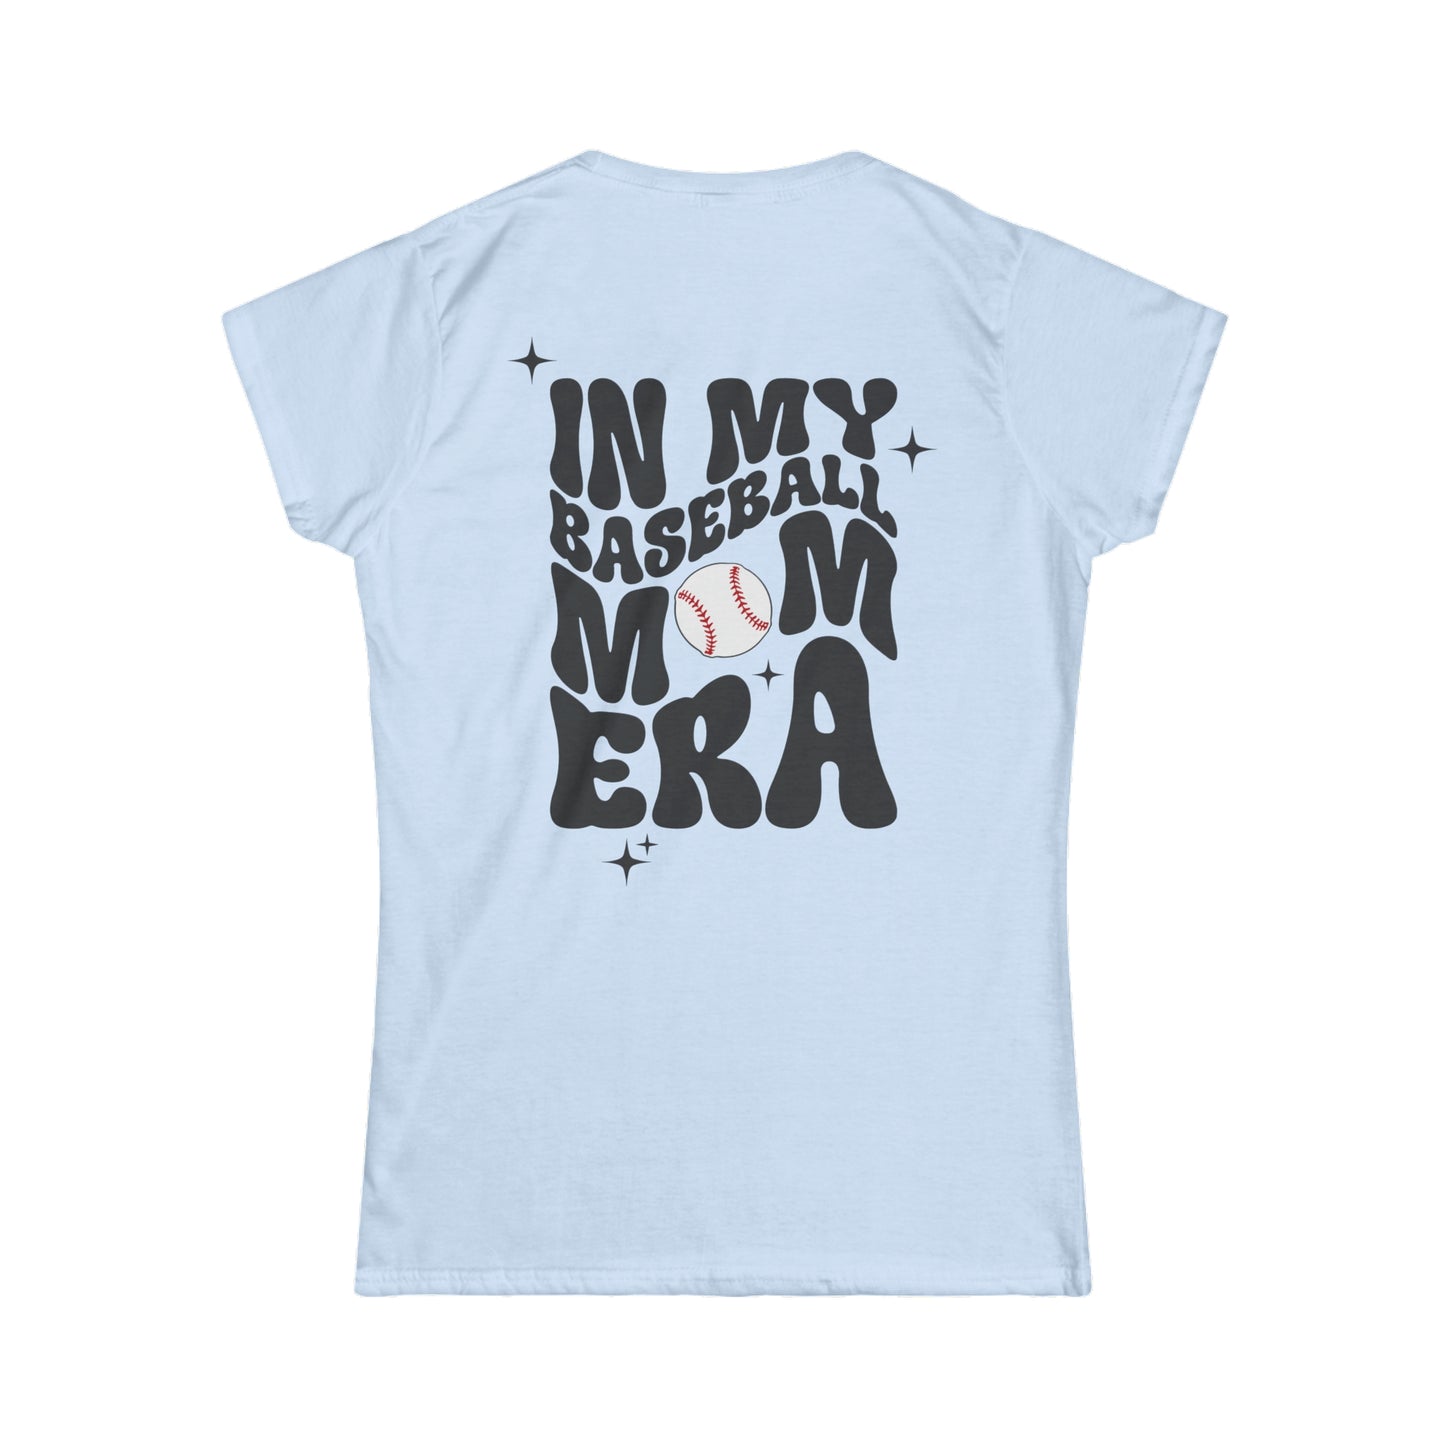 Baseball Mom Era Women's Softstyle T-Shirt - Chic & Durable, Perfect for Game Day